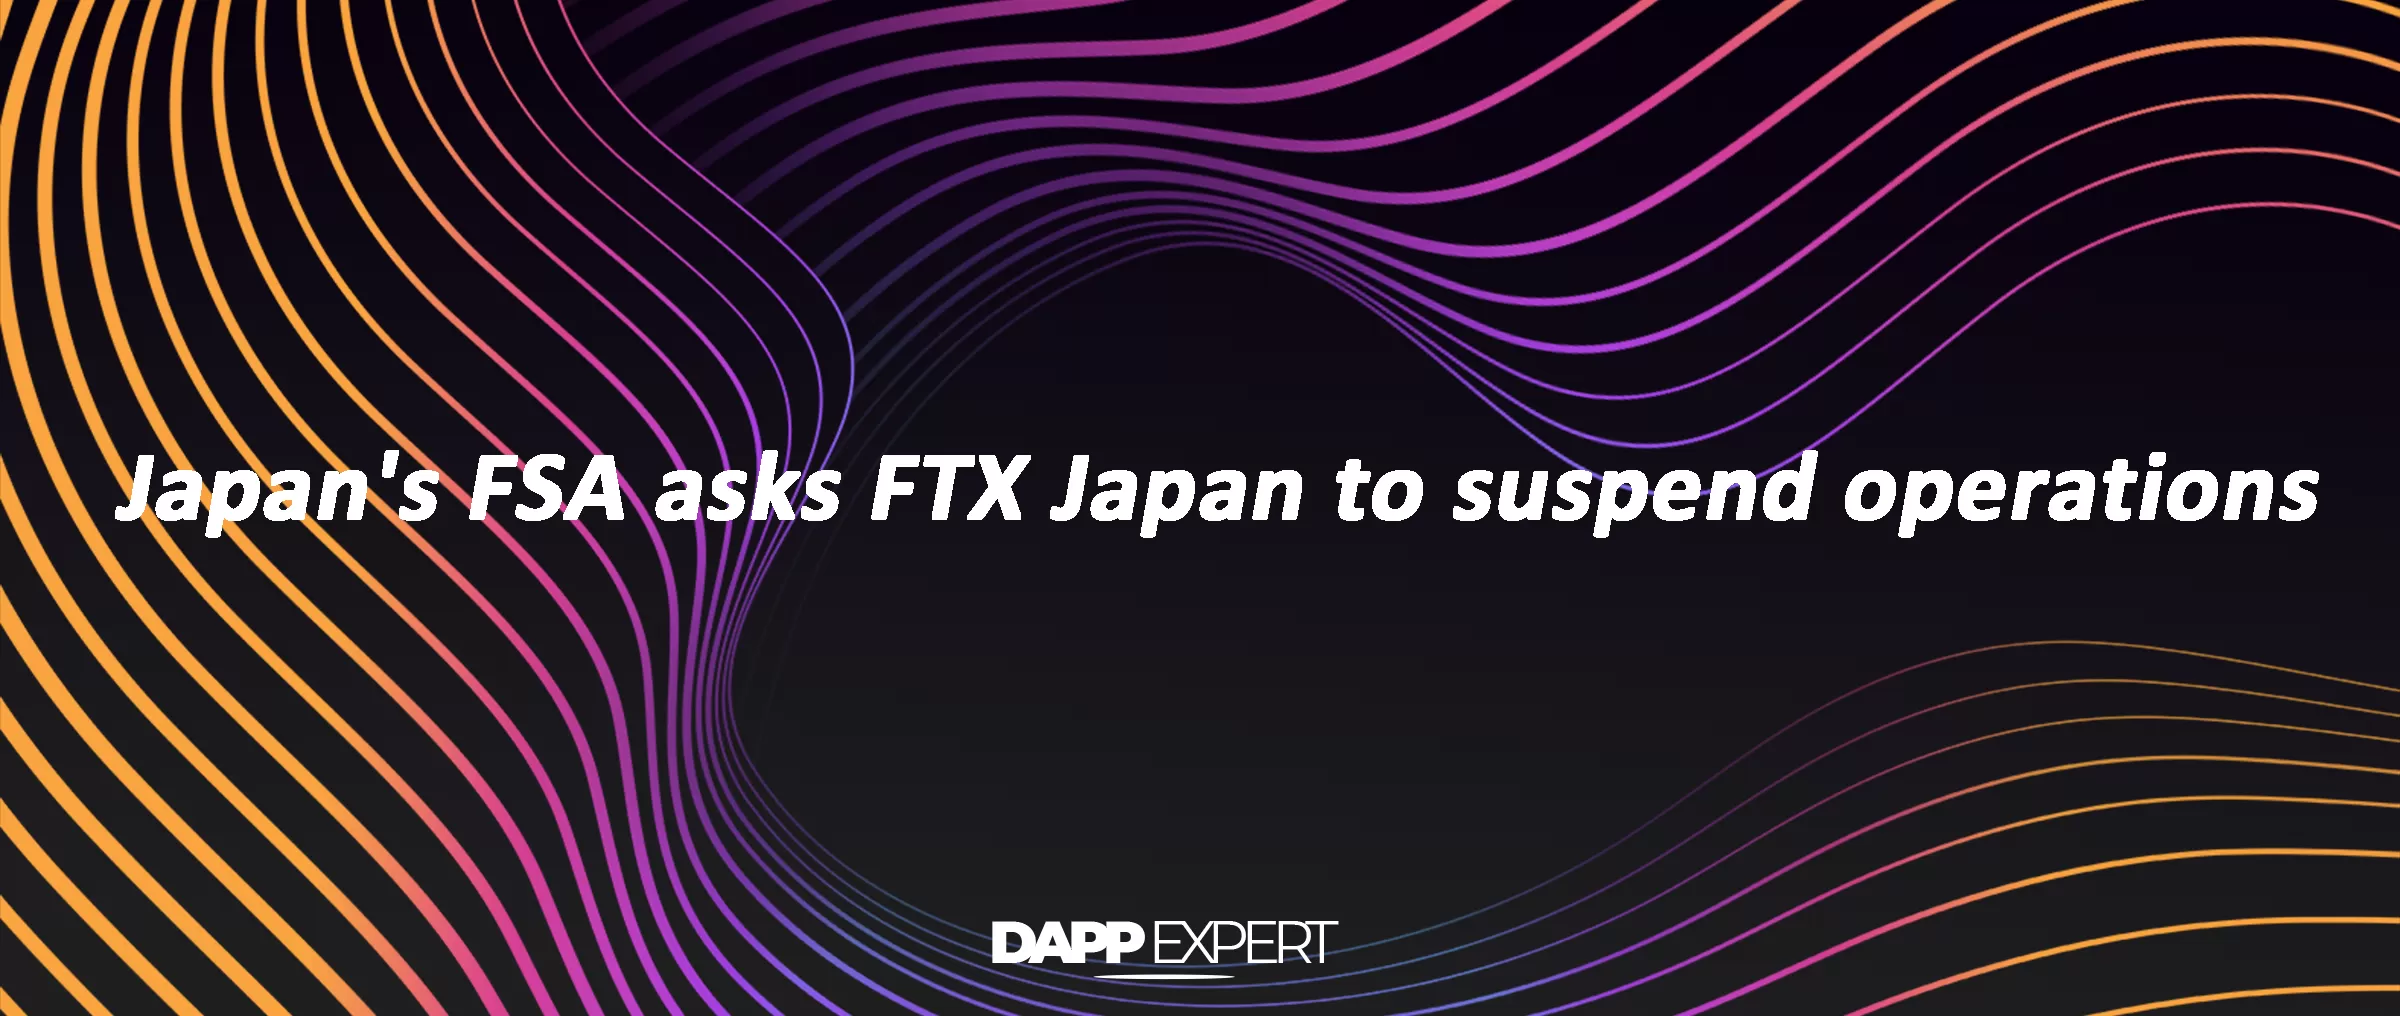 Japan's FSA asks FTX Japan to suspend operations